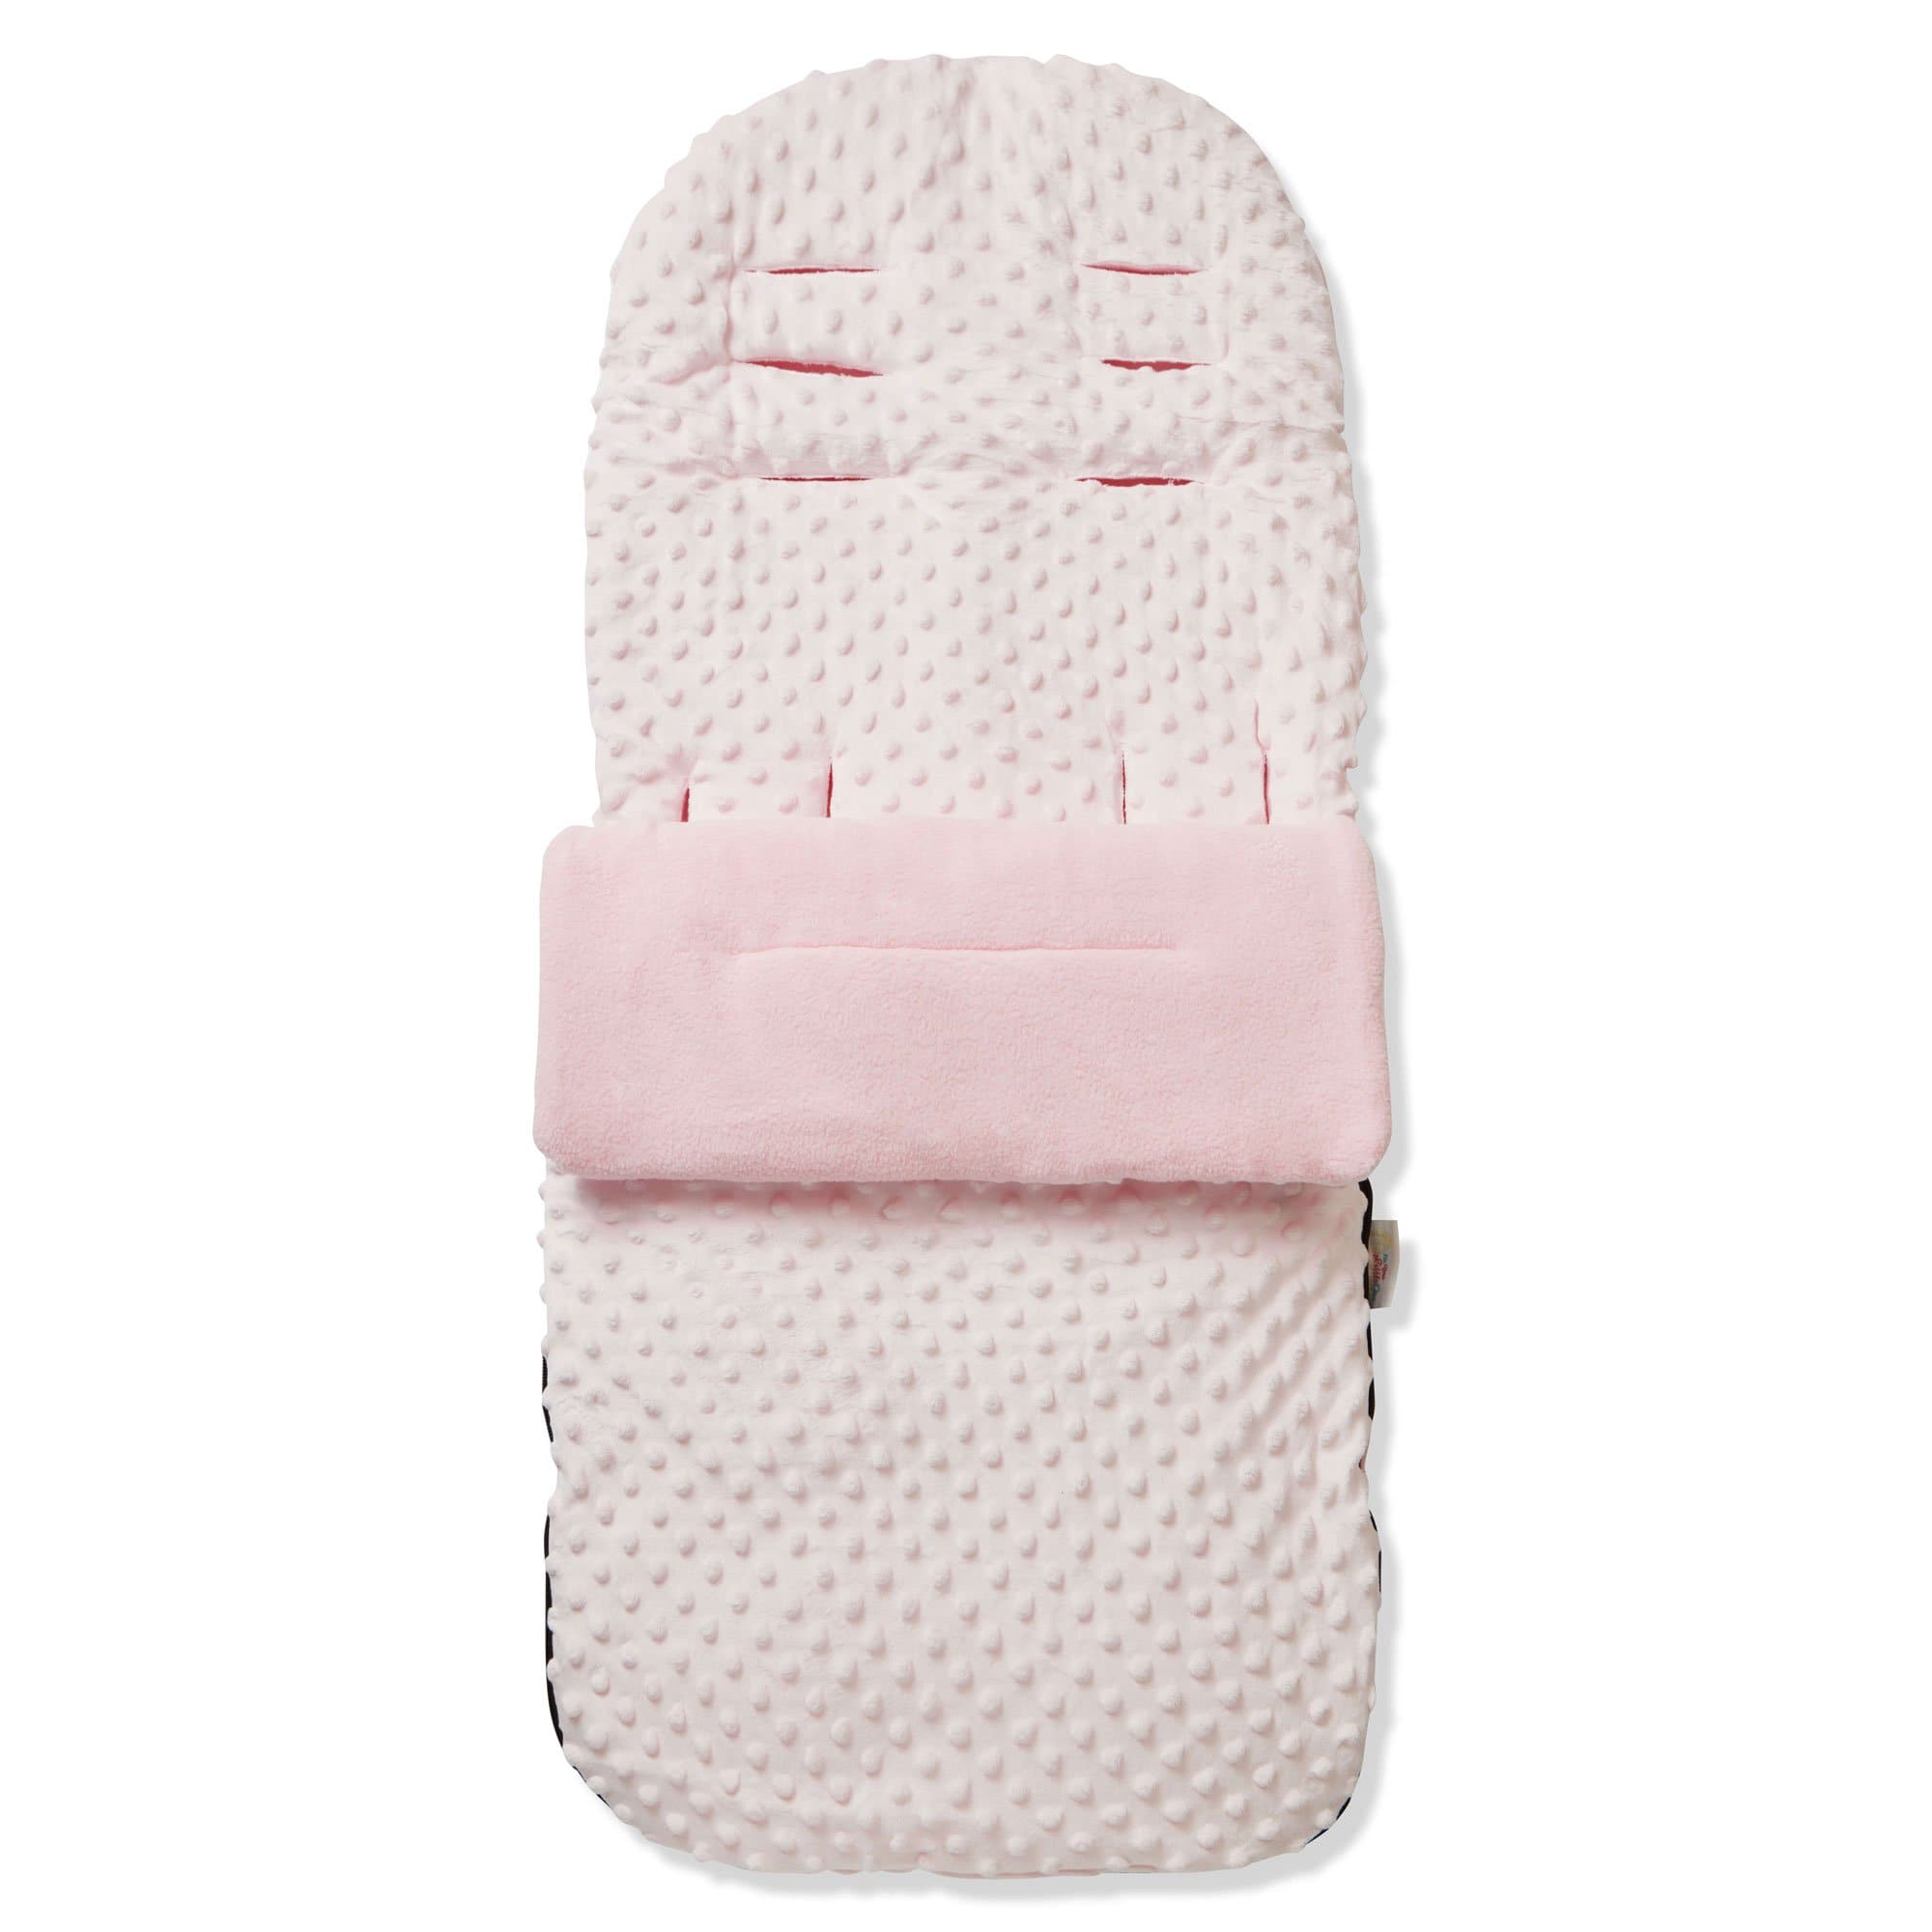 Dimple Footmuff / Cosy Toes Compatible with TFK - Pink / Fits All Models | For Your Little One